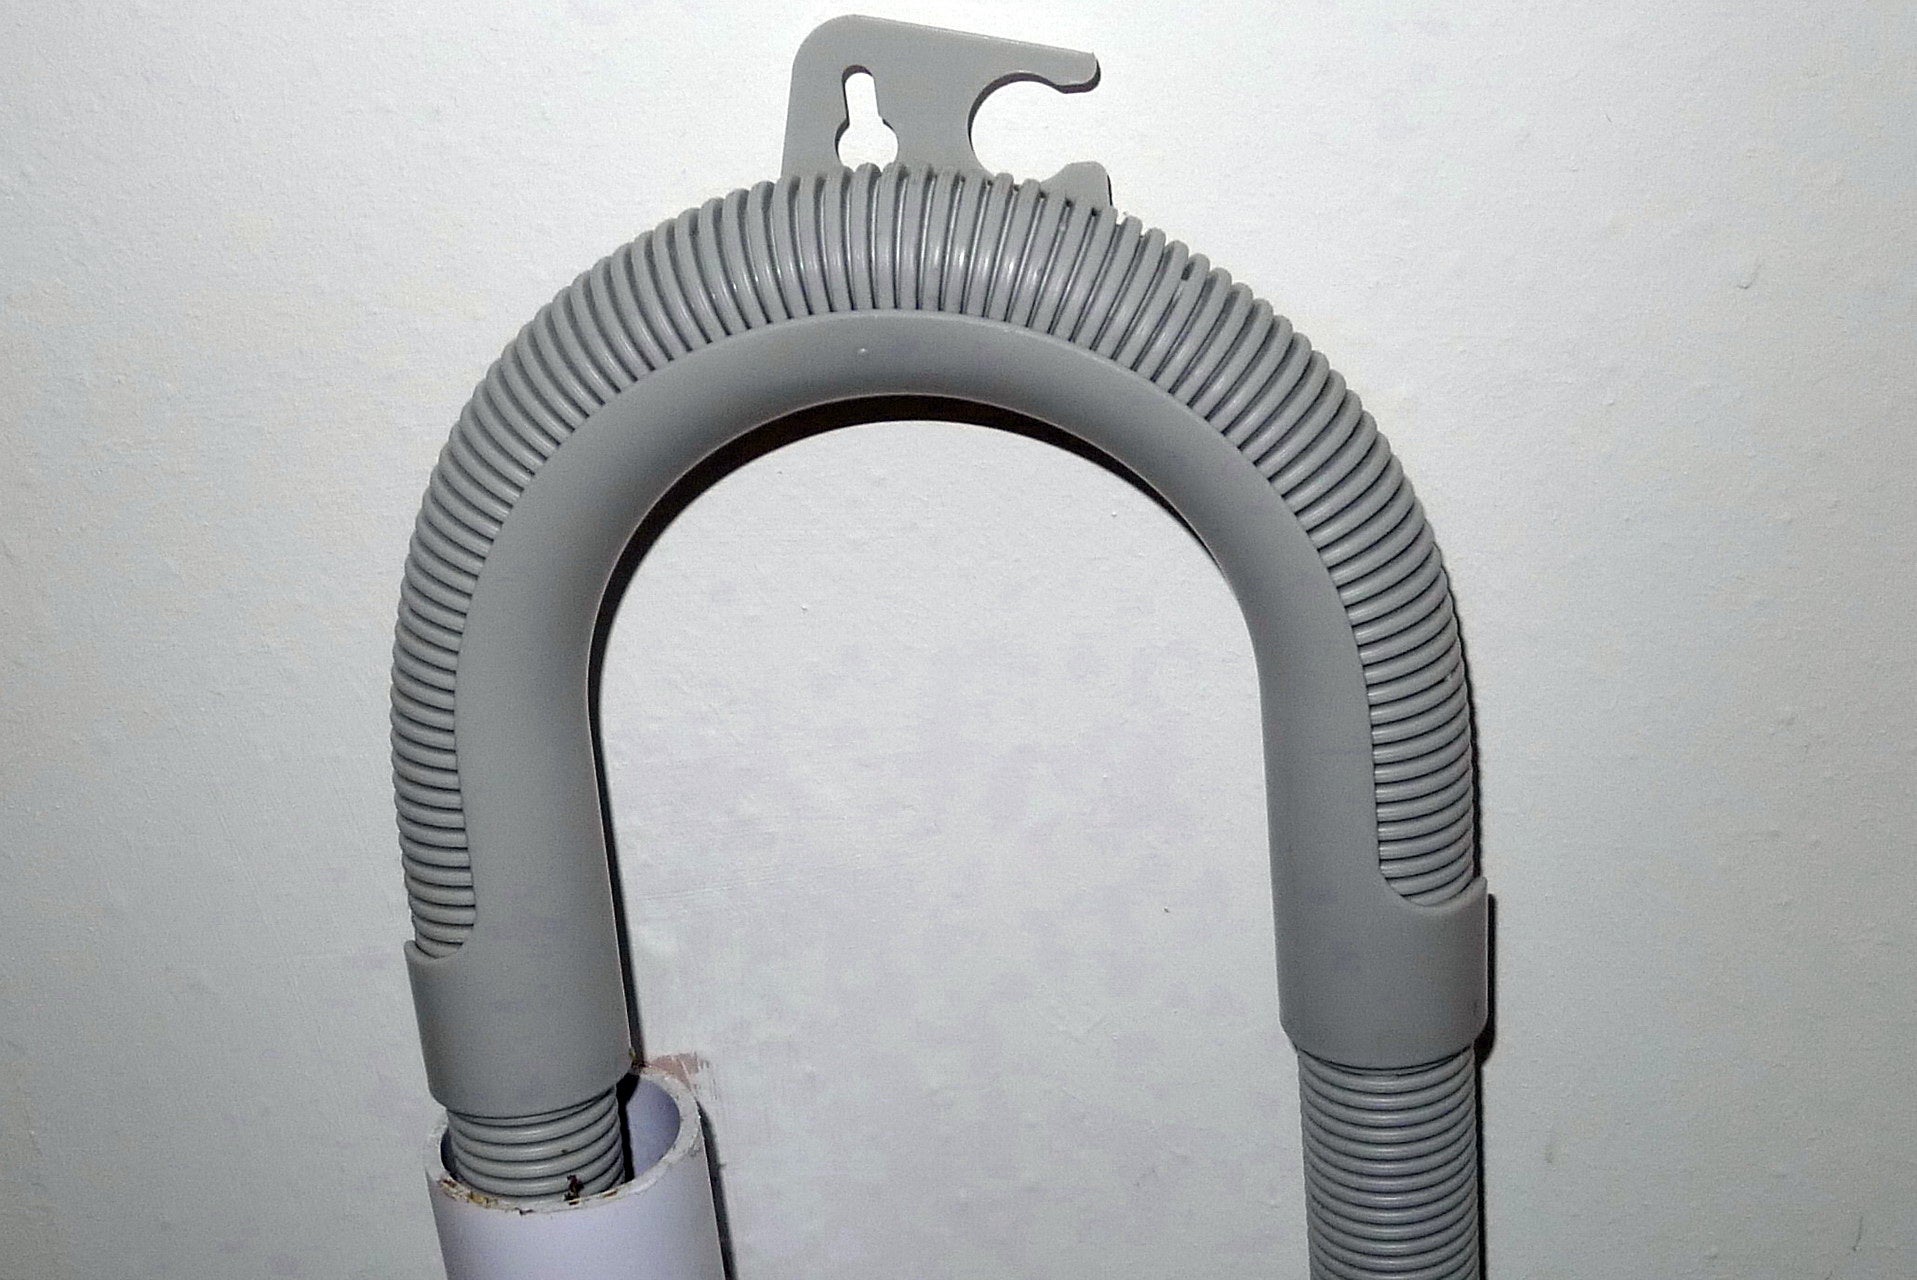 A washing machine drain hose guide above the standpipe